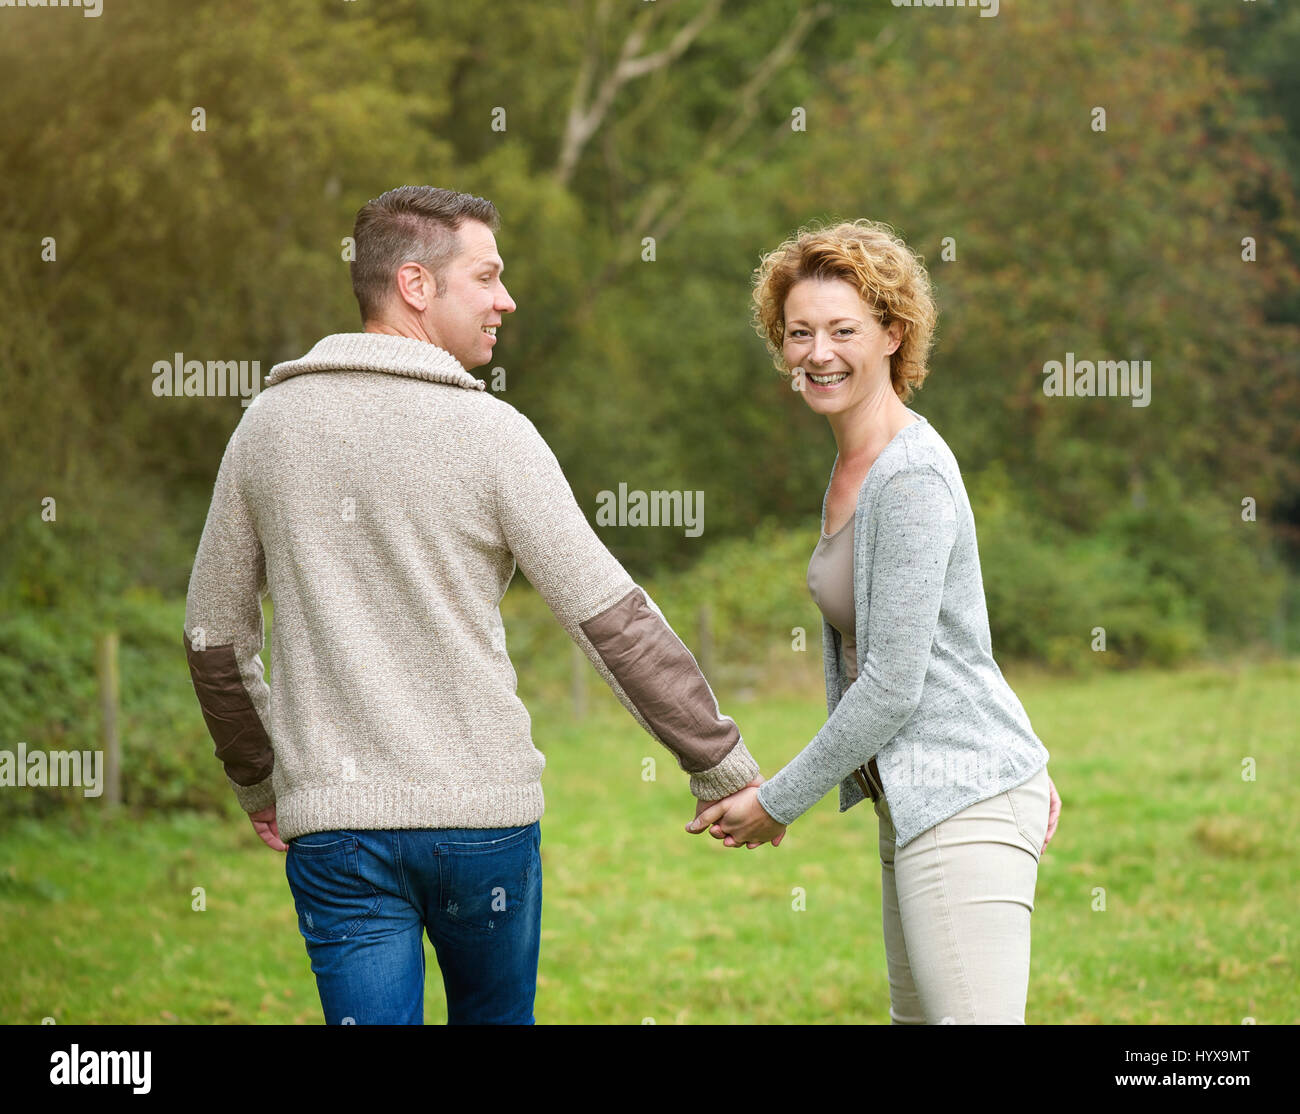 Portrait of a happy couple holding hands and walking outdoors Stock Photo